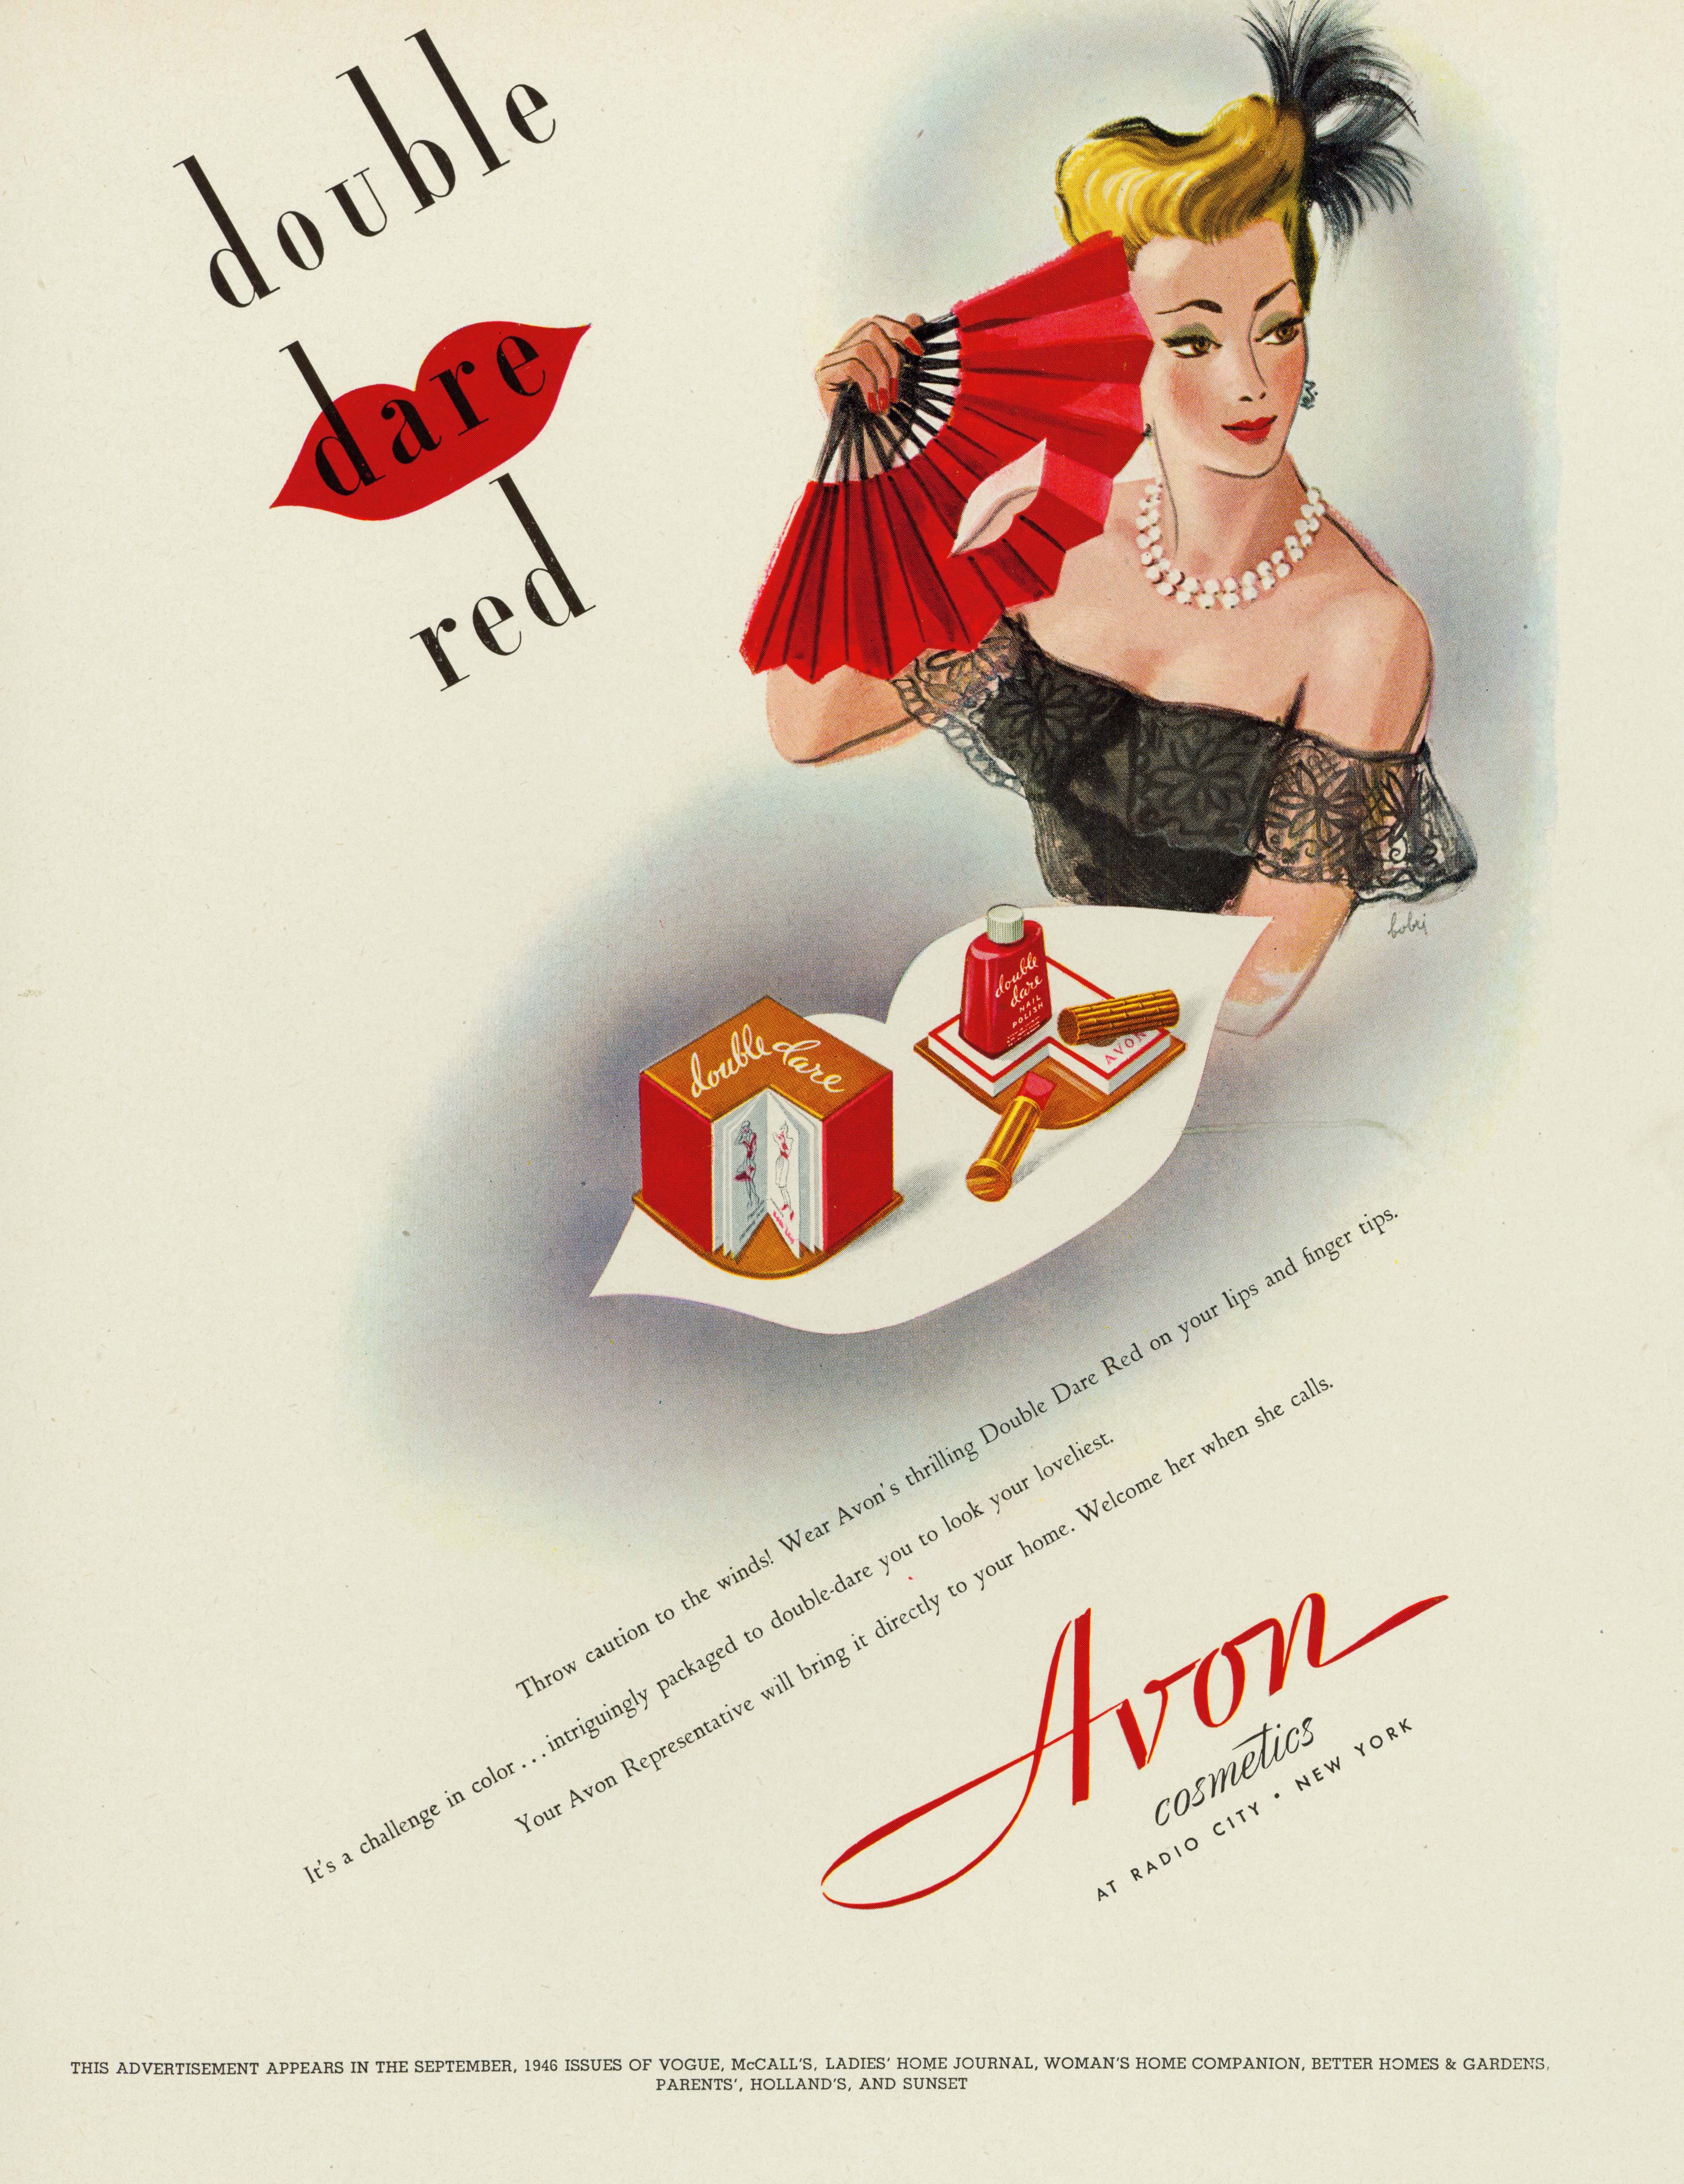 Color illustration of a woman holding a lip-shaped tray of "Double Dare" red lipsticks and nail polish